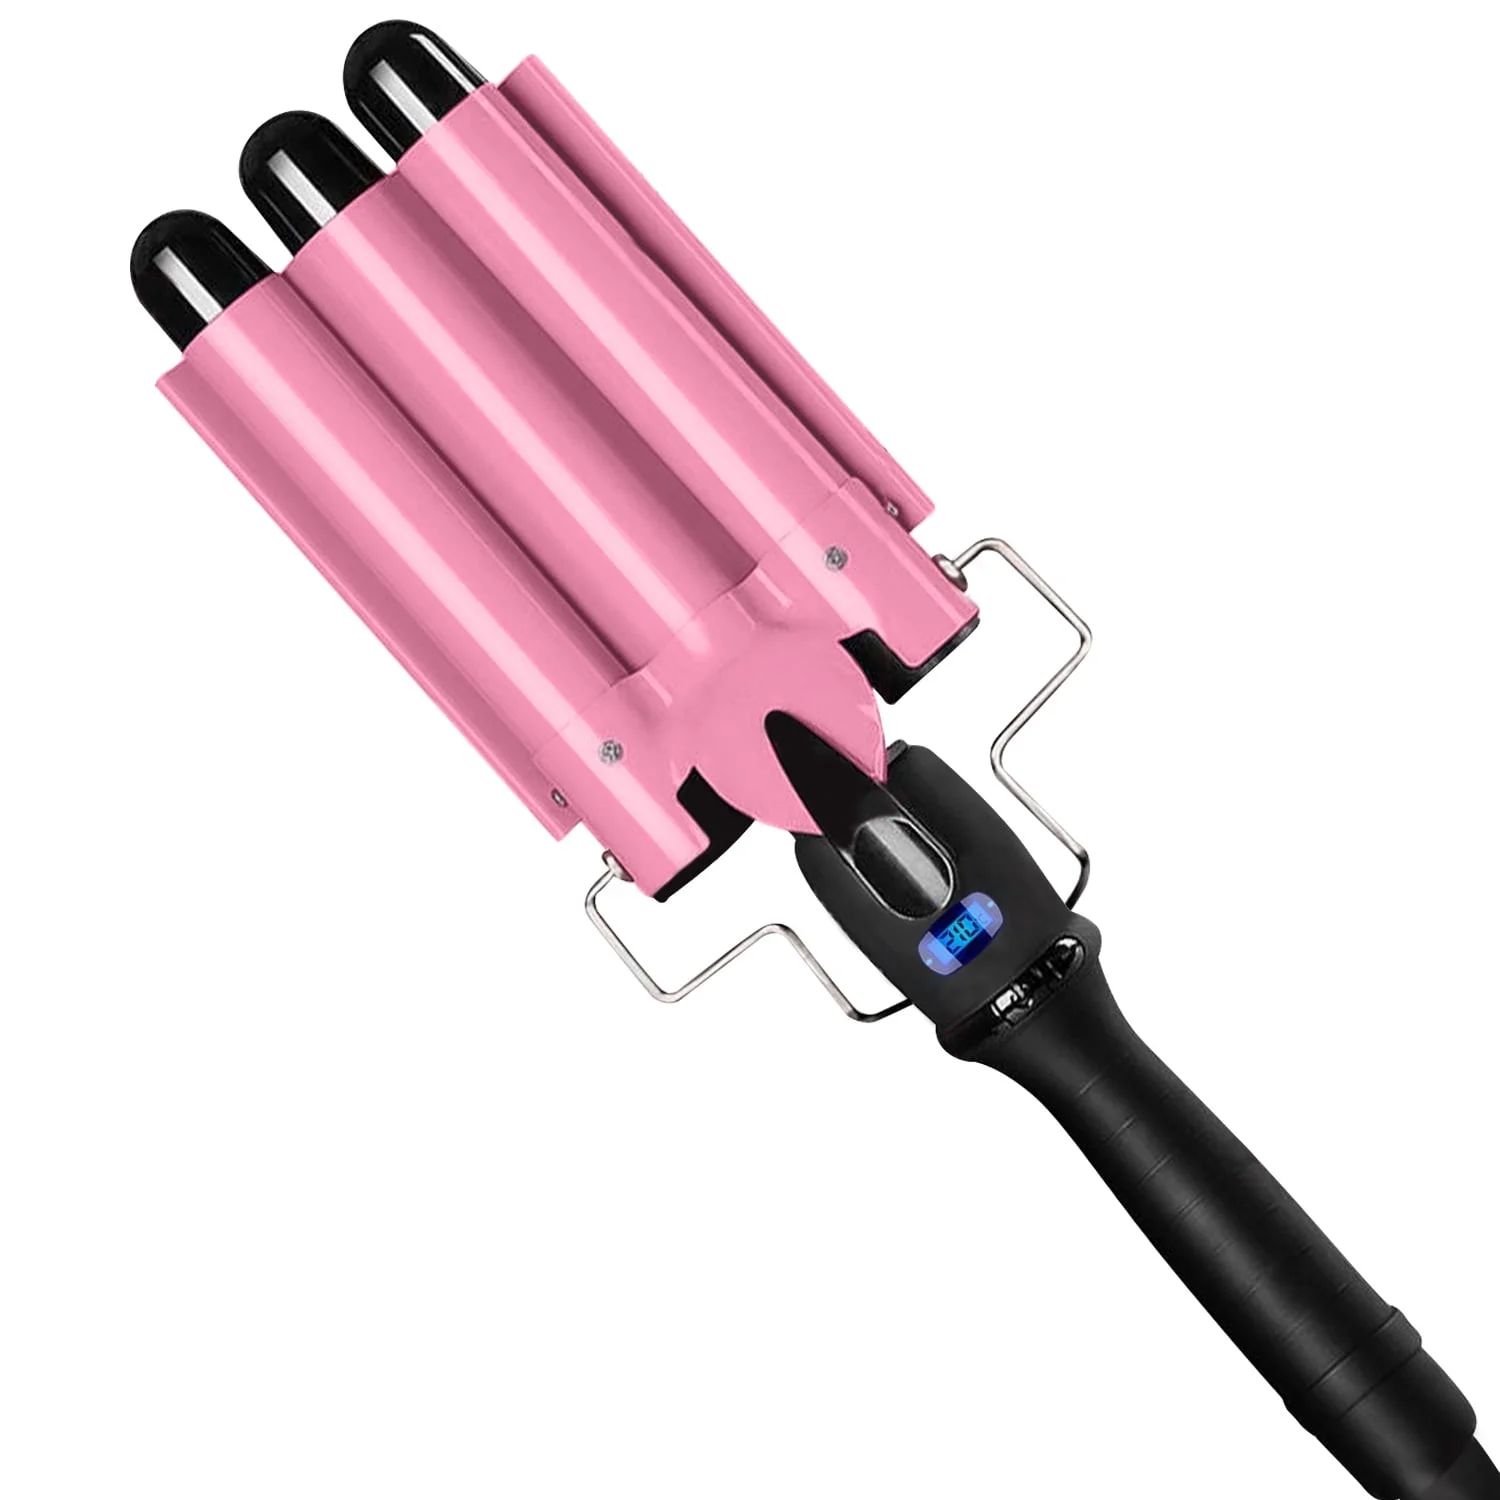 3 Barrel Curling Iron Wand with LCD Temperature Display - Hosey 1 Inch Ceramic Tourmaline Triple ... | Walmart (US)